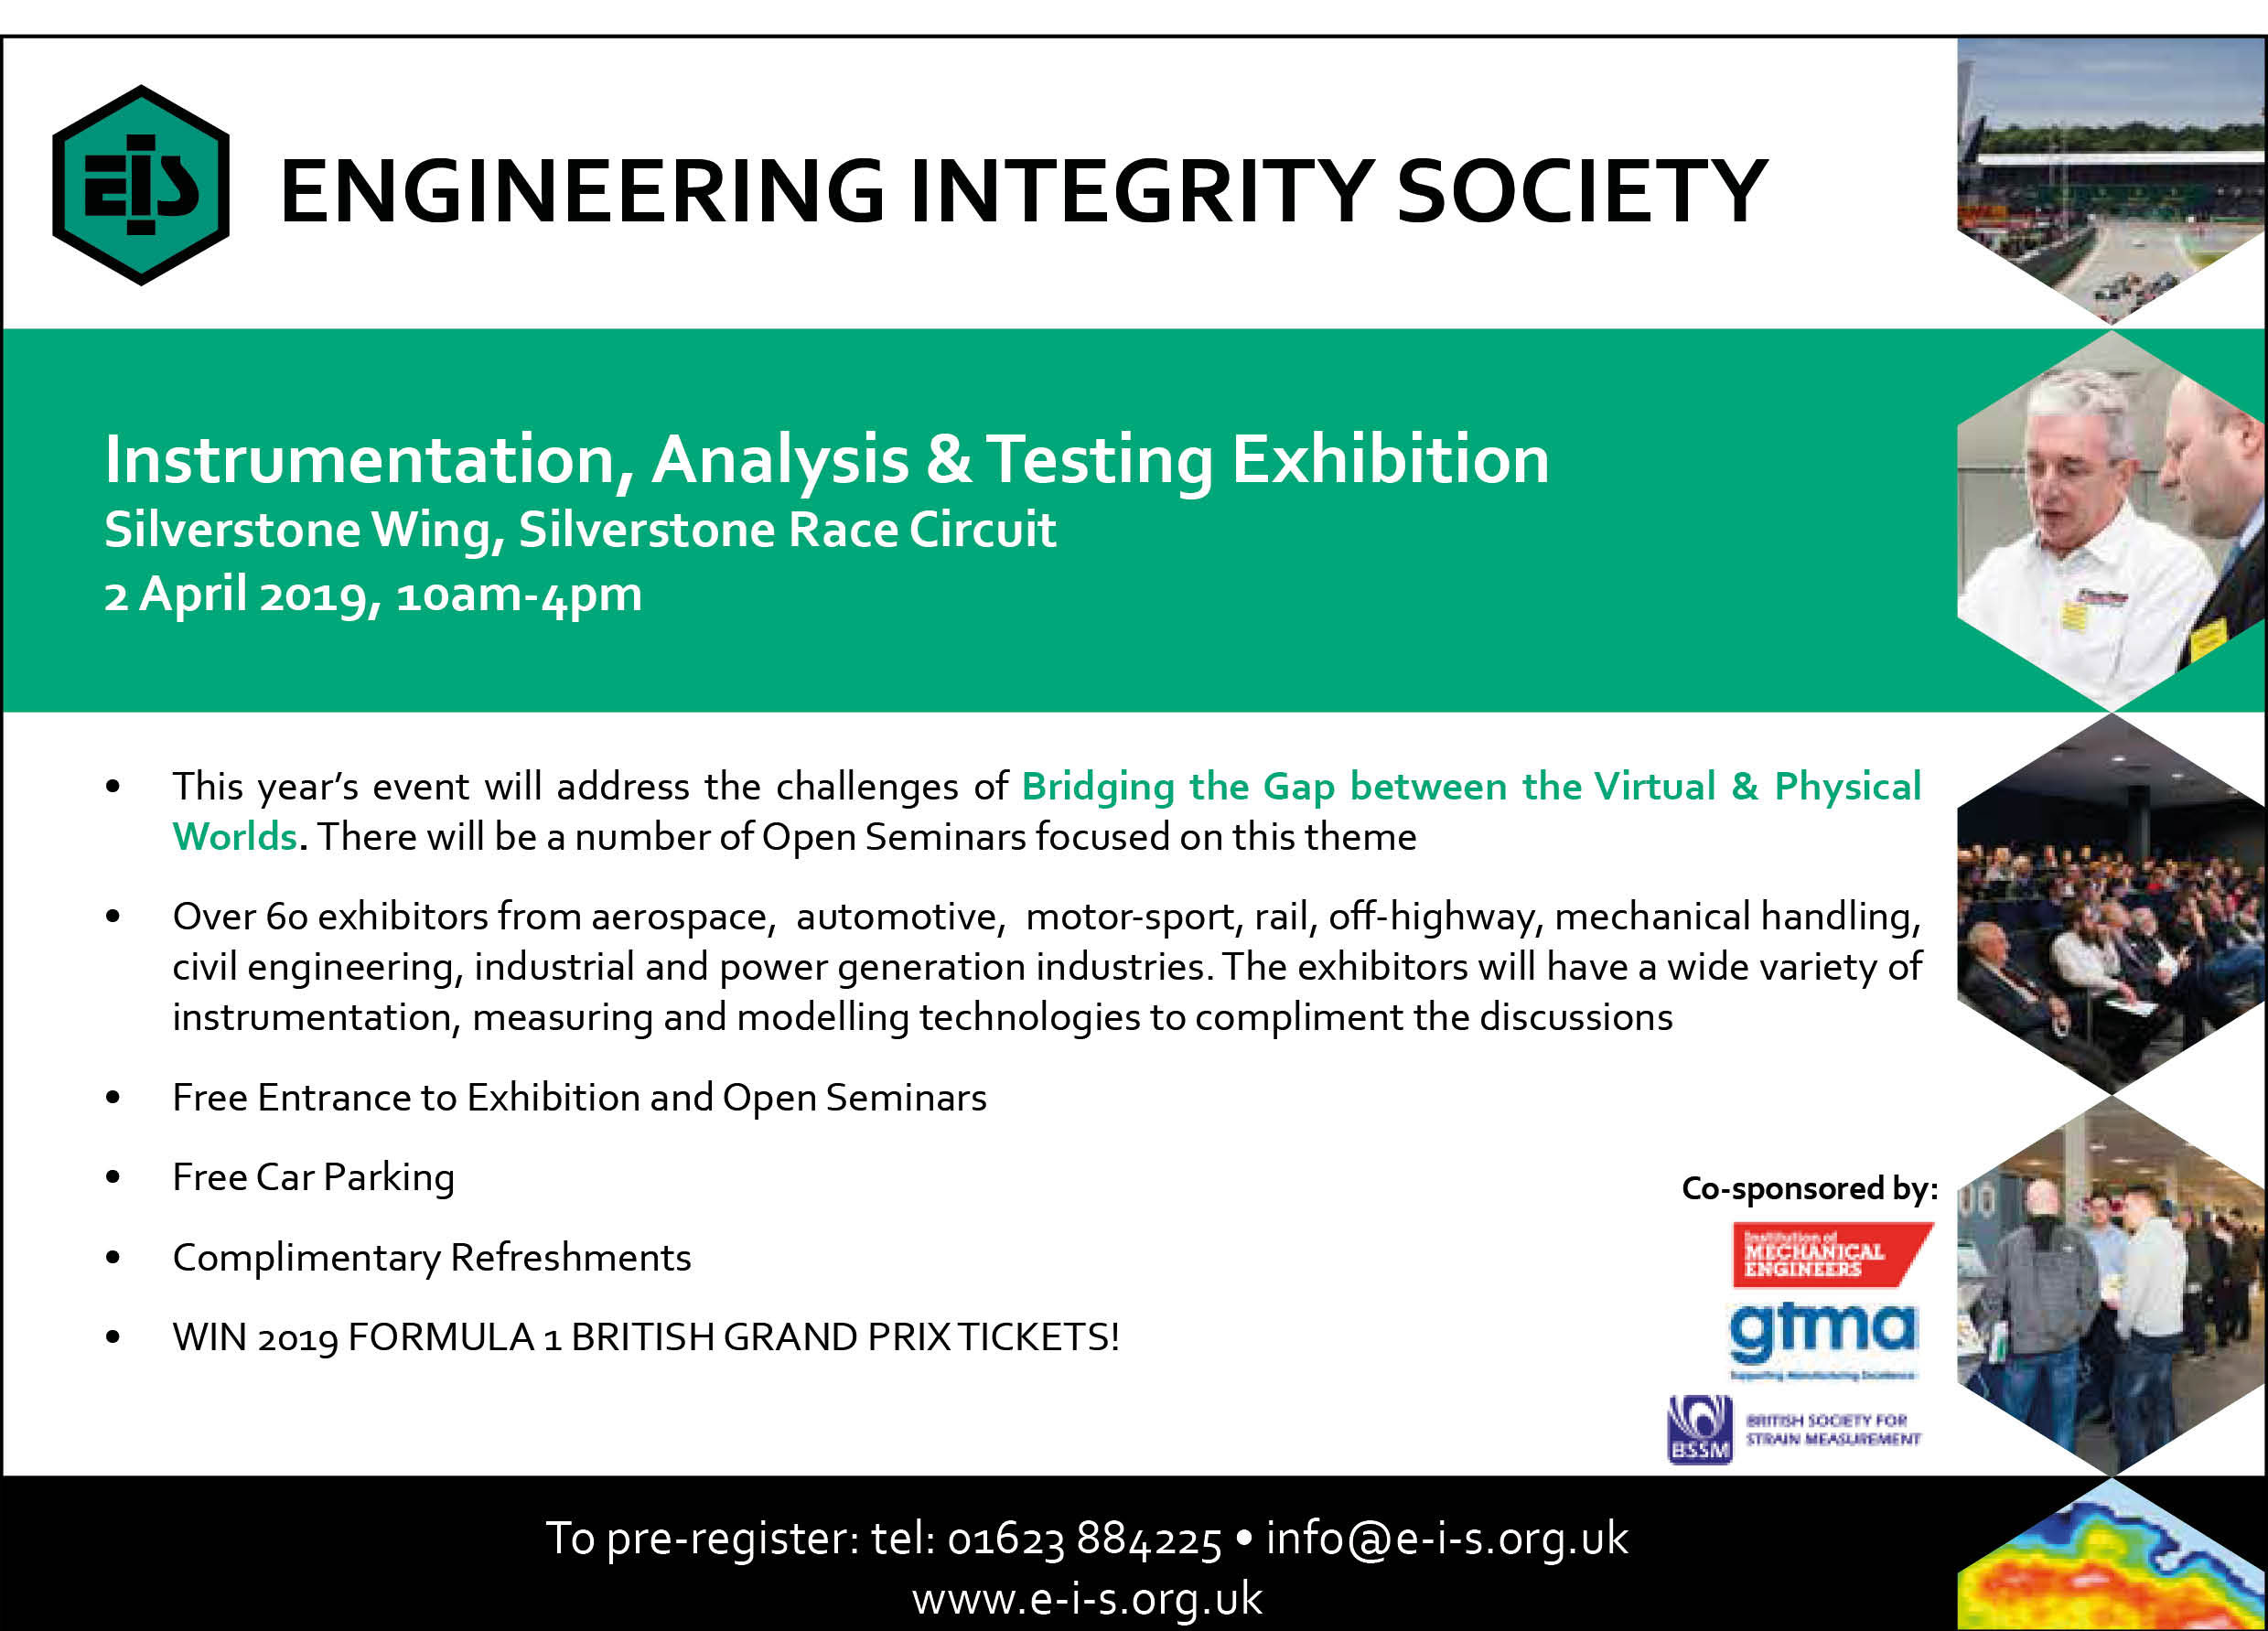 Silverstone Race Circuit EIS Instrumentation, Analysis and Testing Exhibition 2nd April 2019